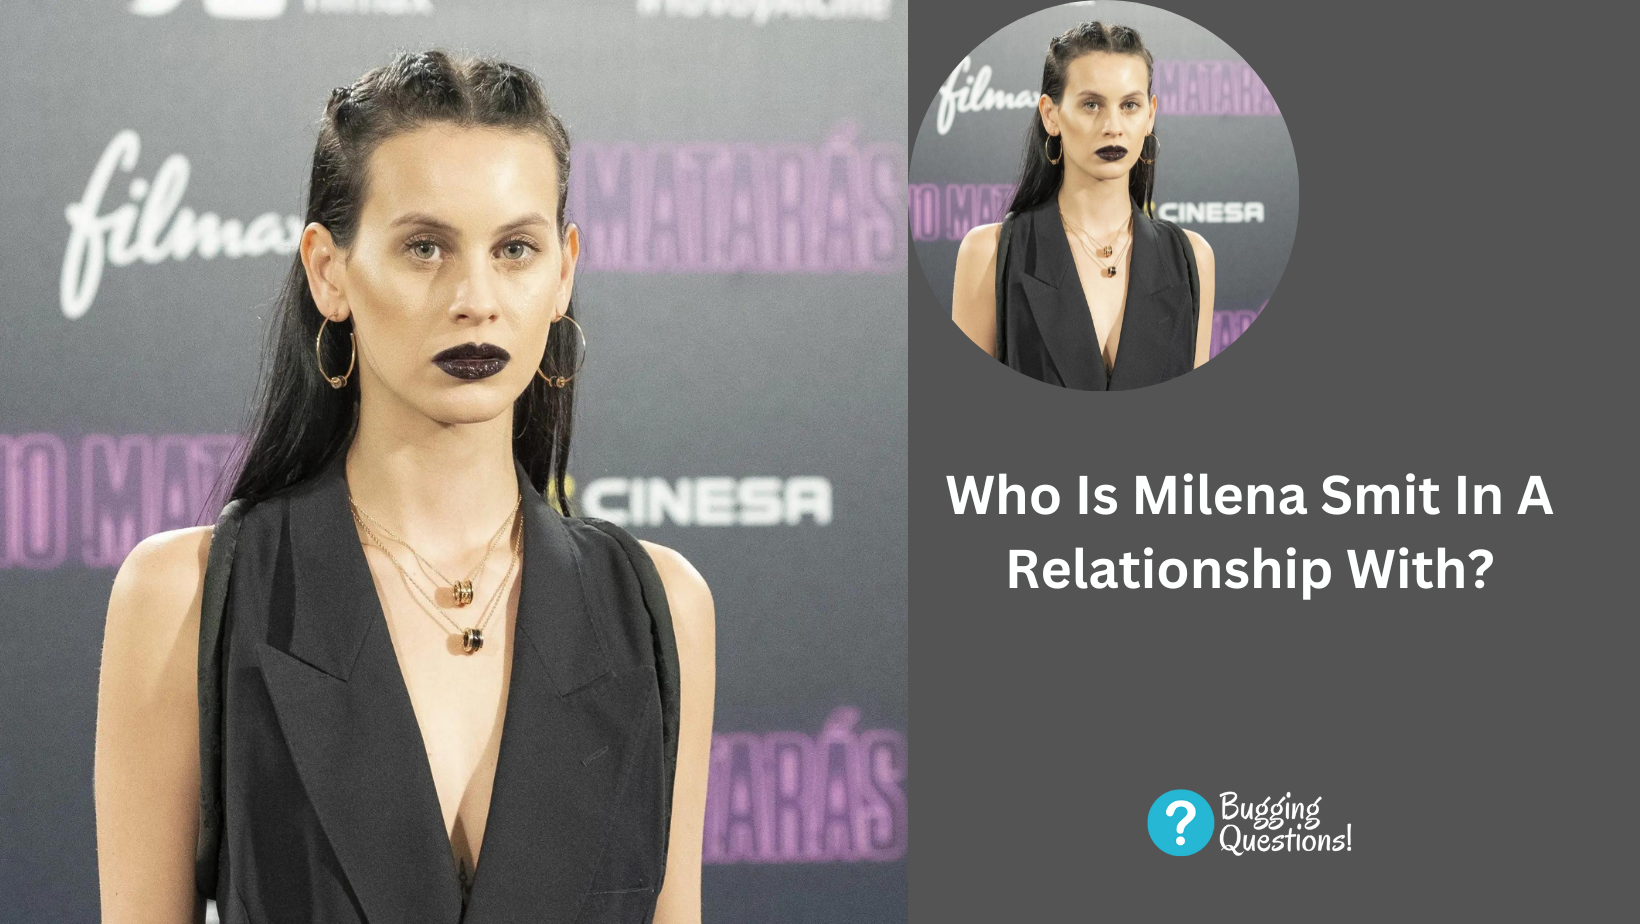 Who Is Milena Smit In A Relationship With?